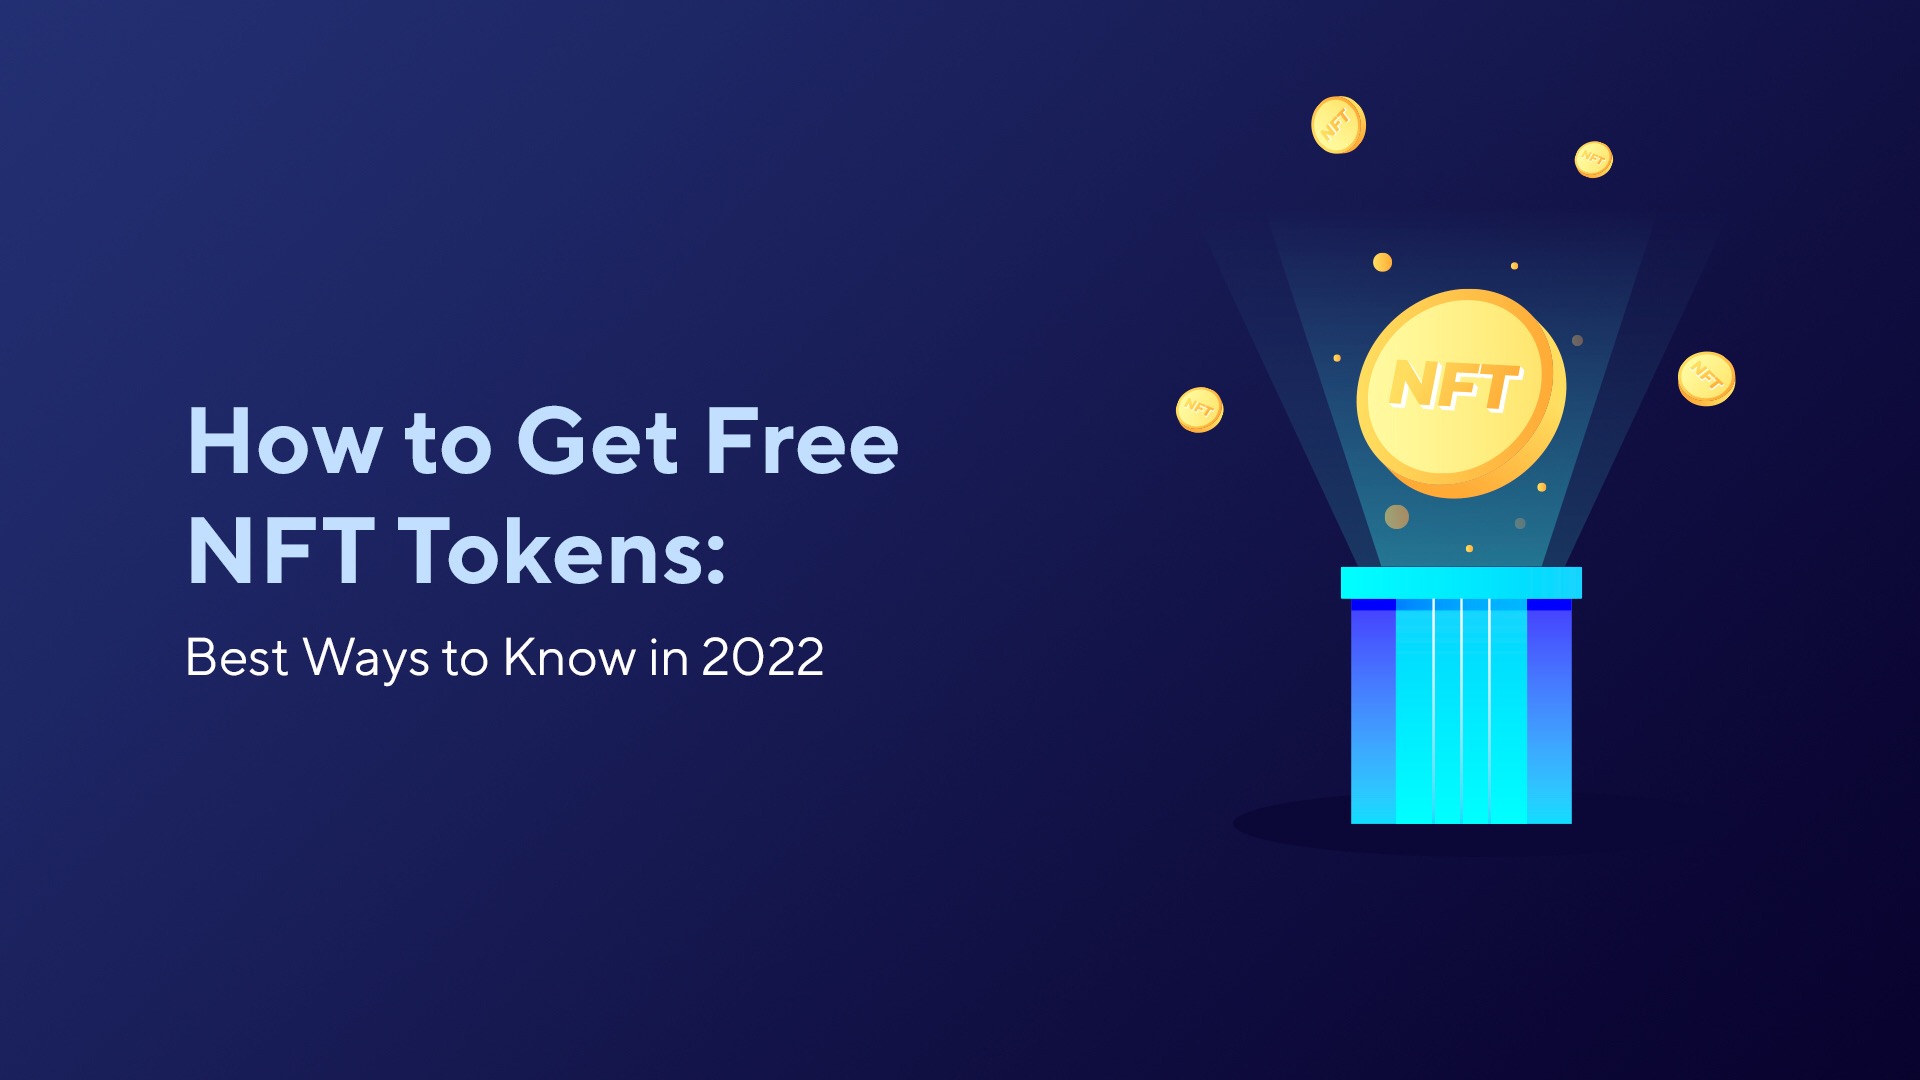 How to Get Free NFT Tokens: Best Ways to Know in 2022